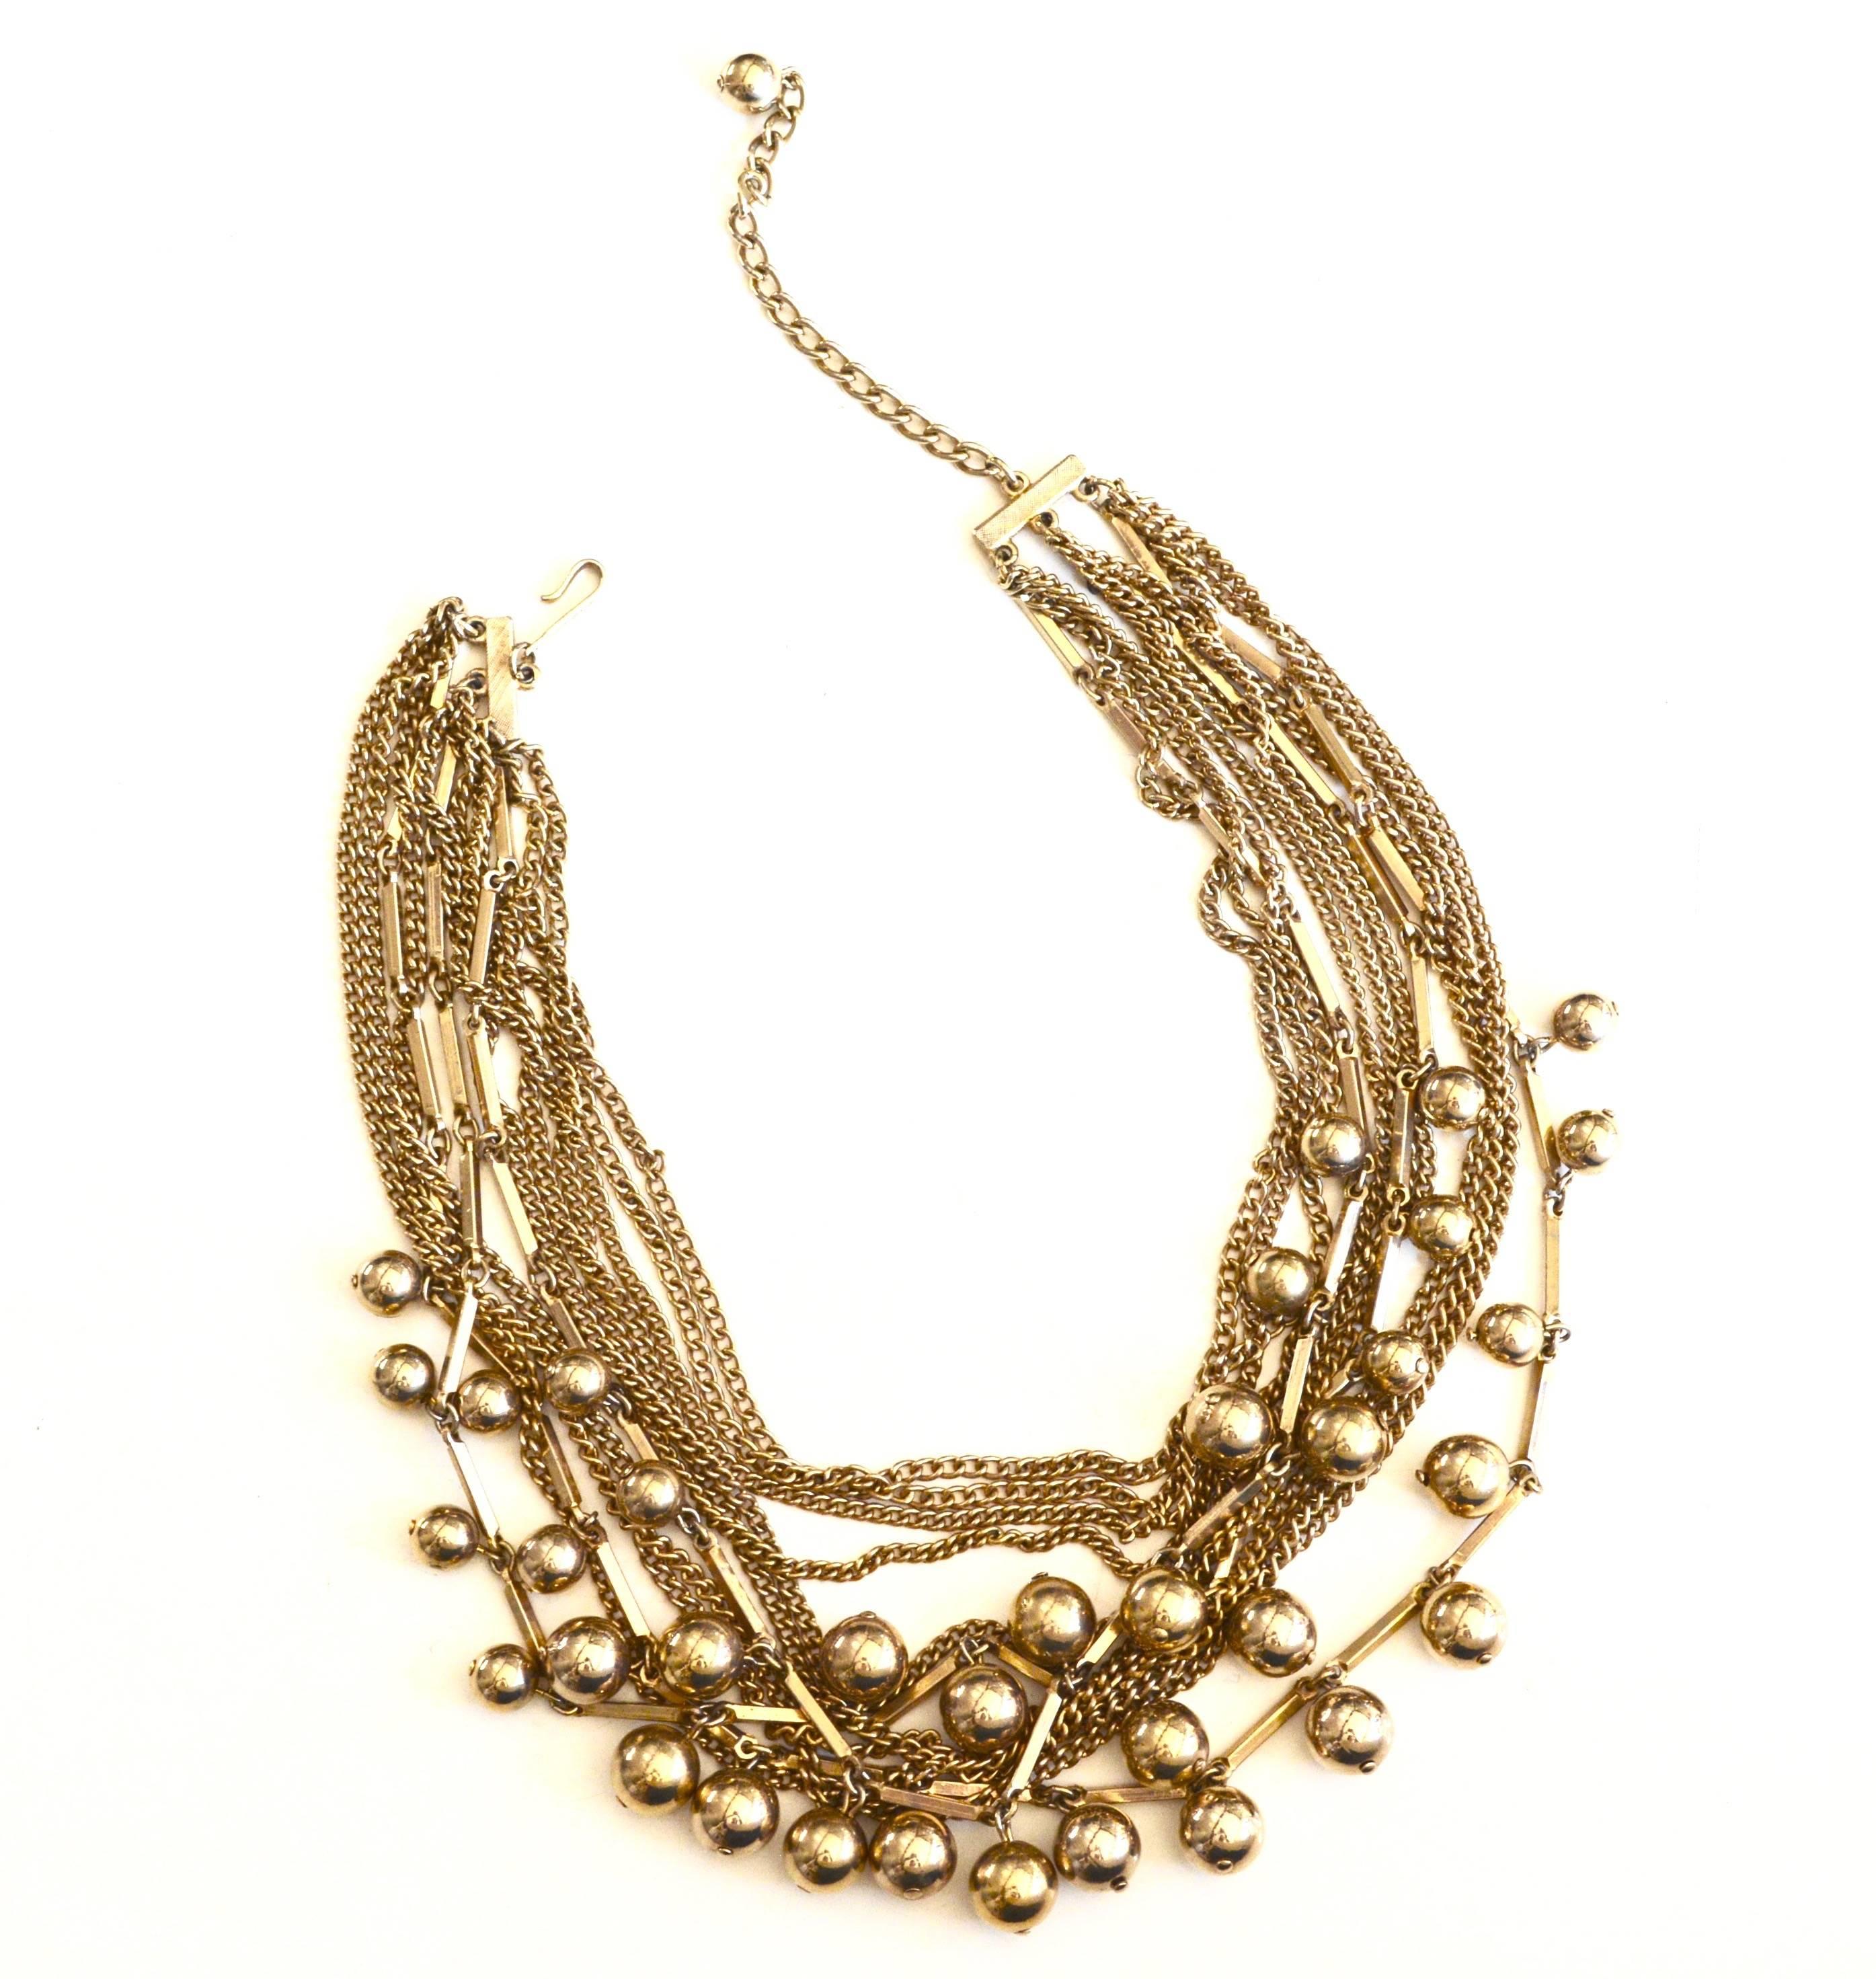 1950s matte gold multilayer signed Coro necklace with ball charms or beads. Finish is muted but intact. Lovely textured look and feel.  Adjusts up to 16